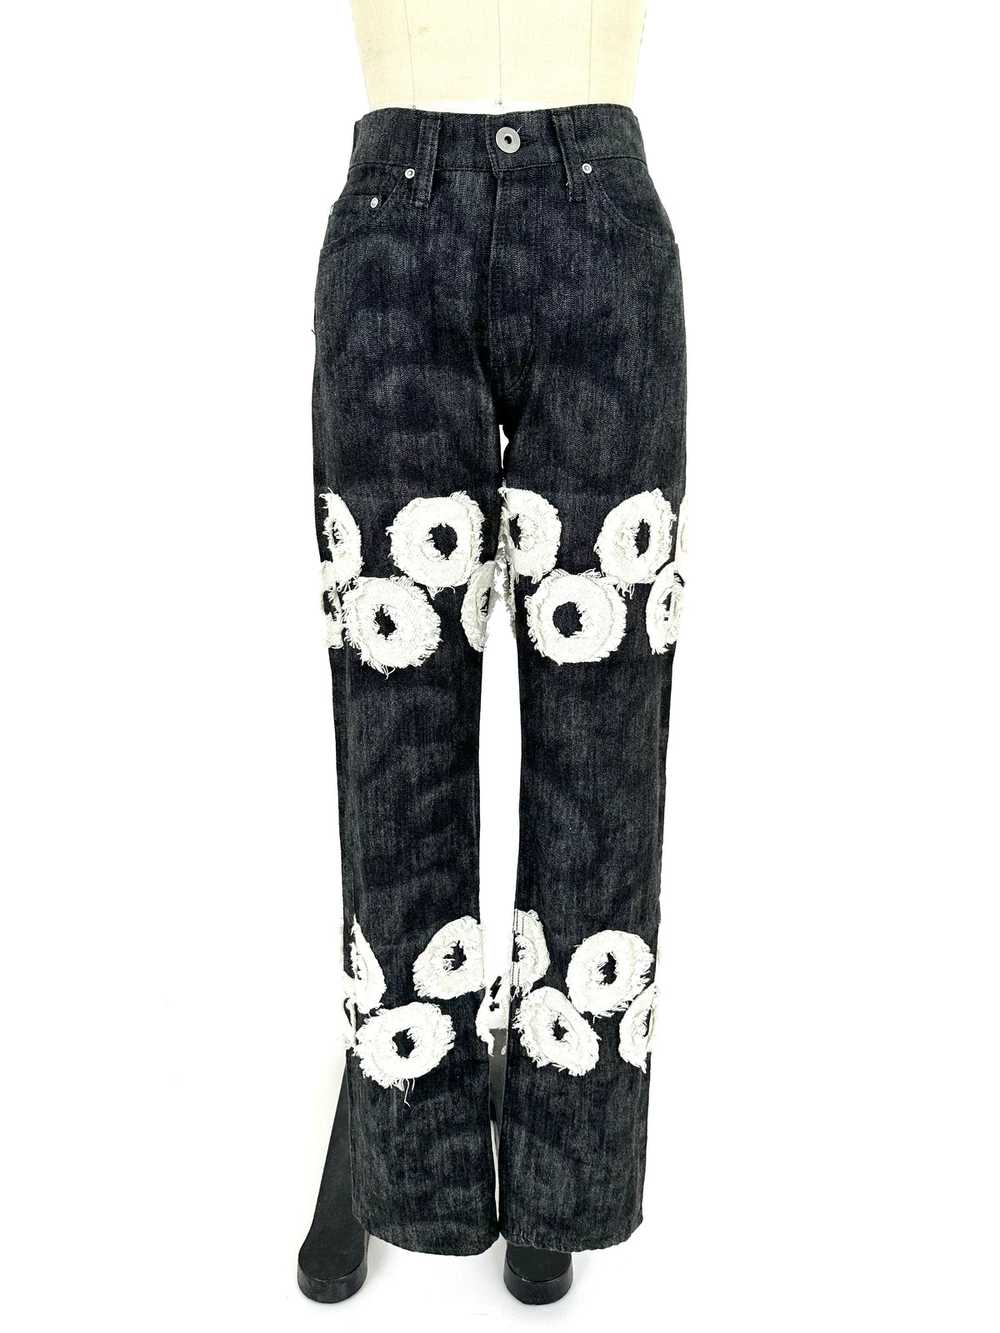 2011 Issey Miyake Archive Embroidered Jeans - image 5